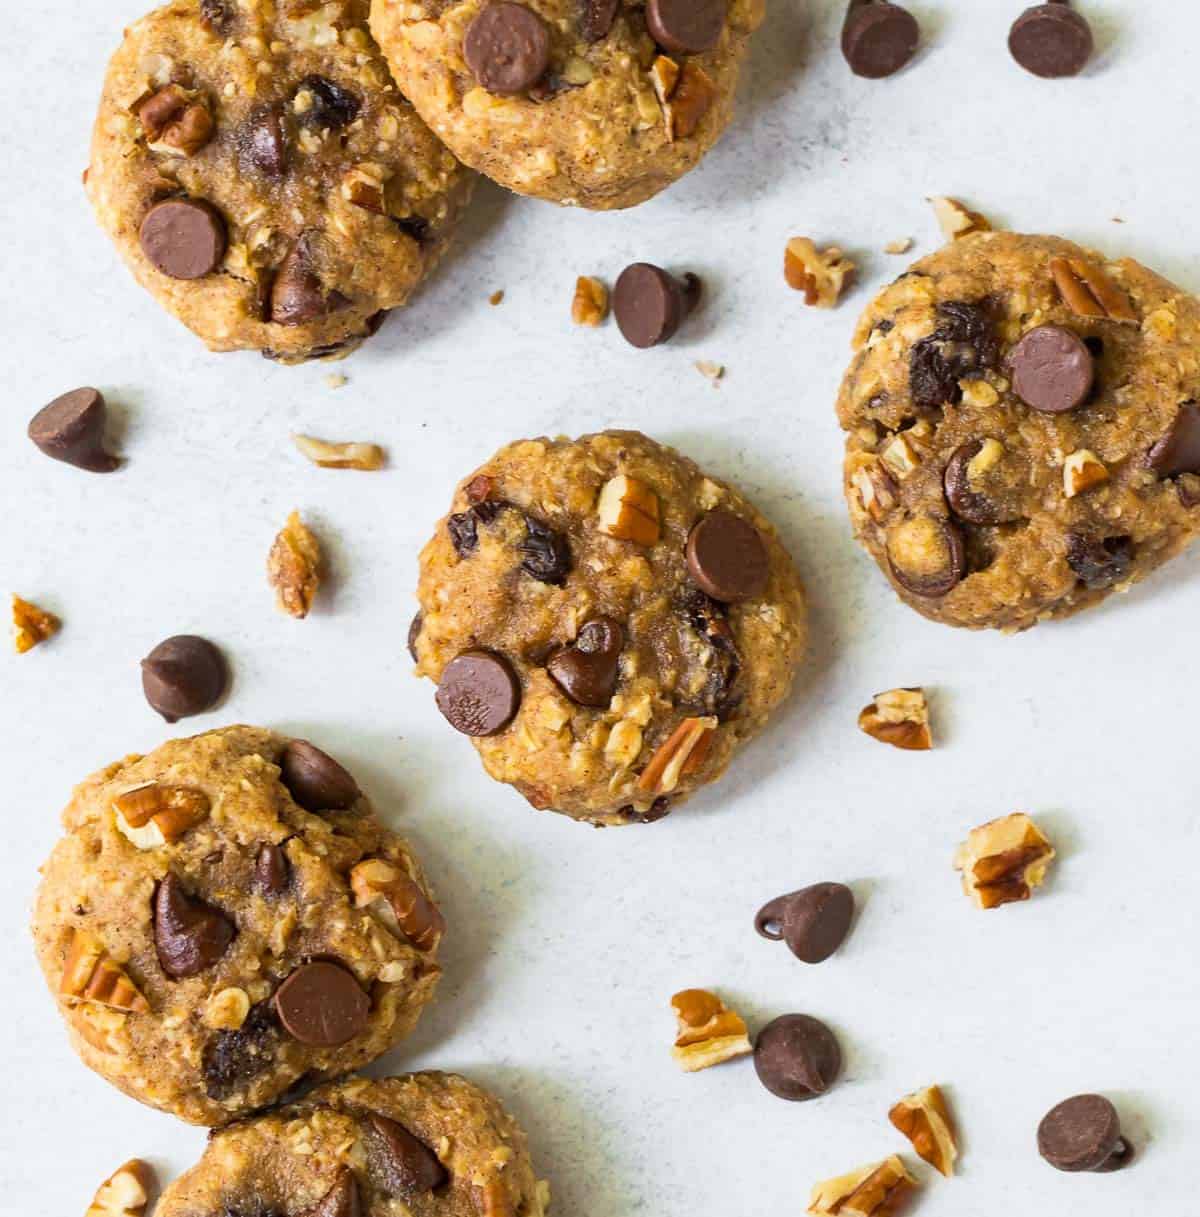 Simple and delicious cookies with chocolate chips, chopped nuts, and oats